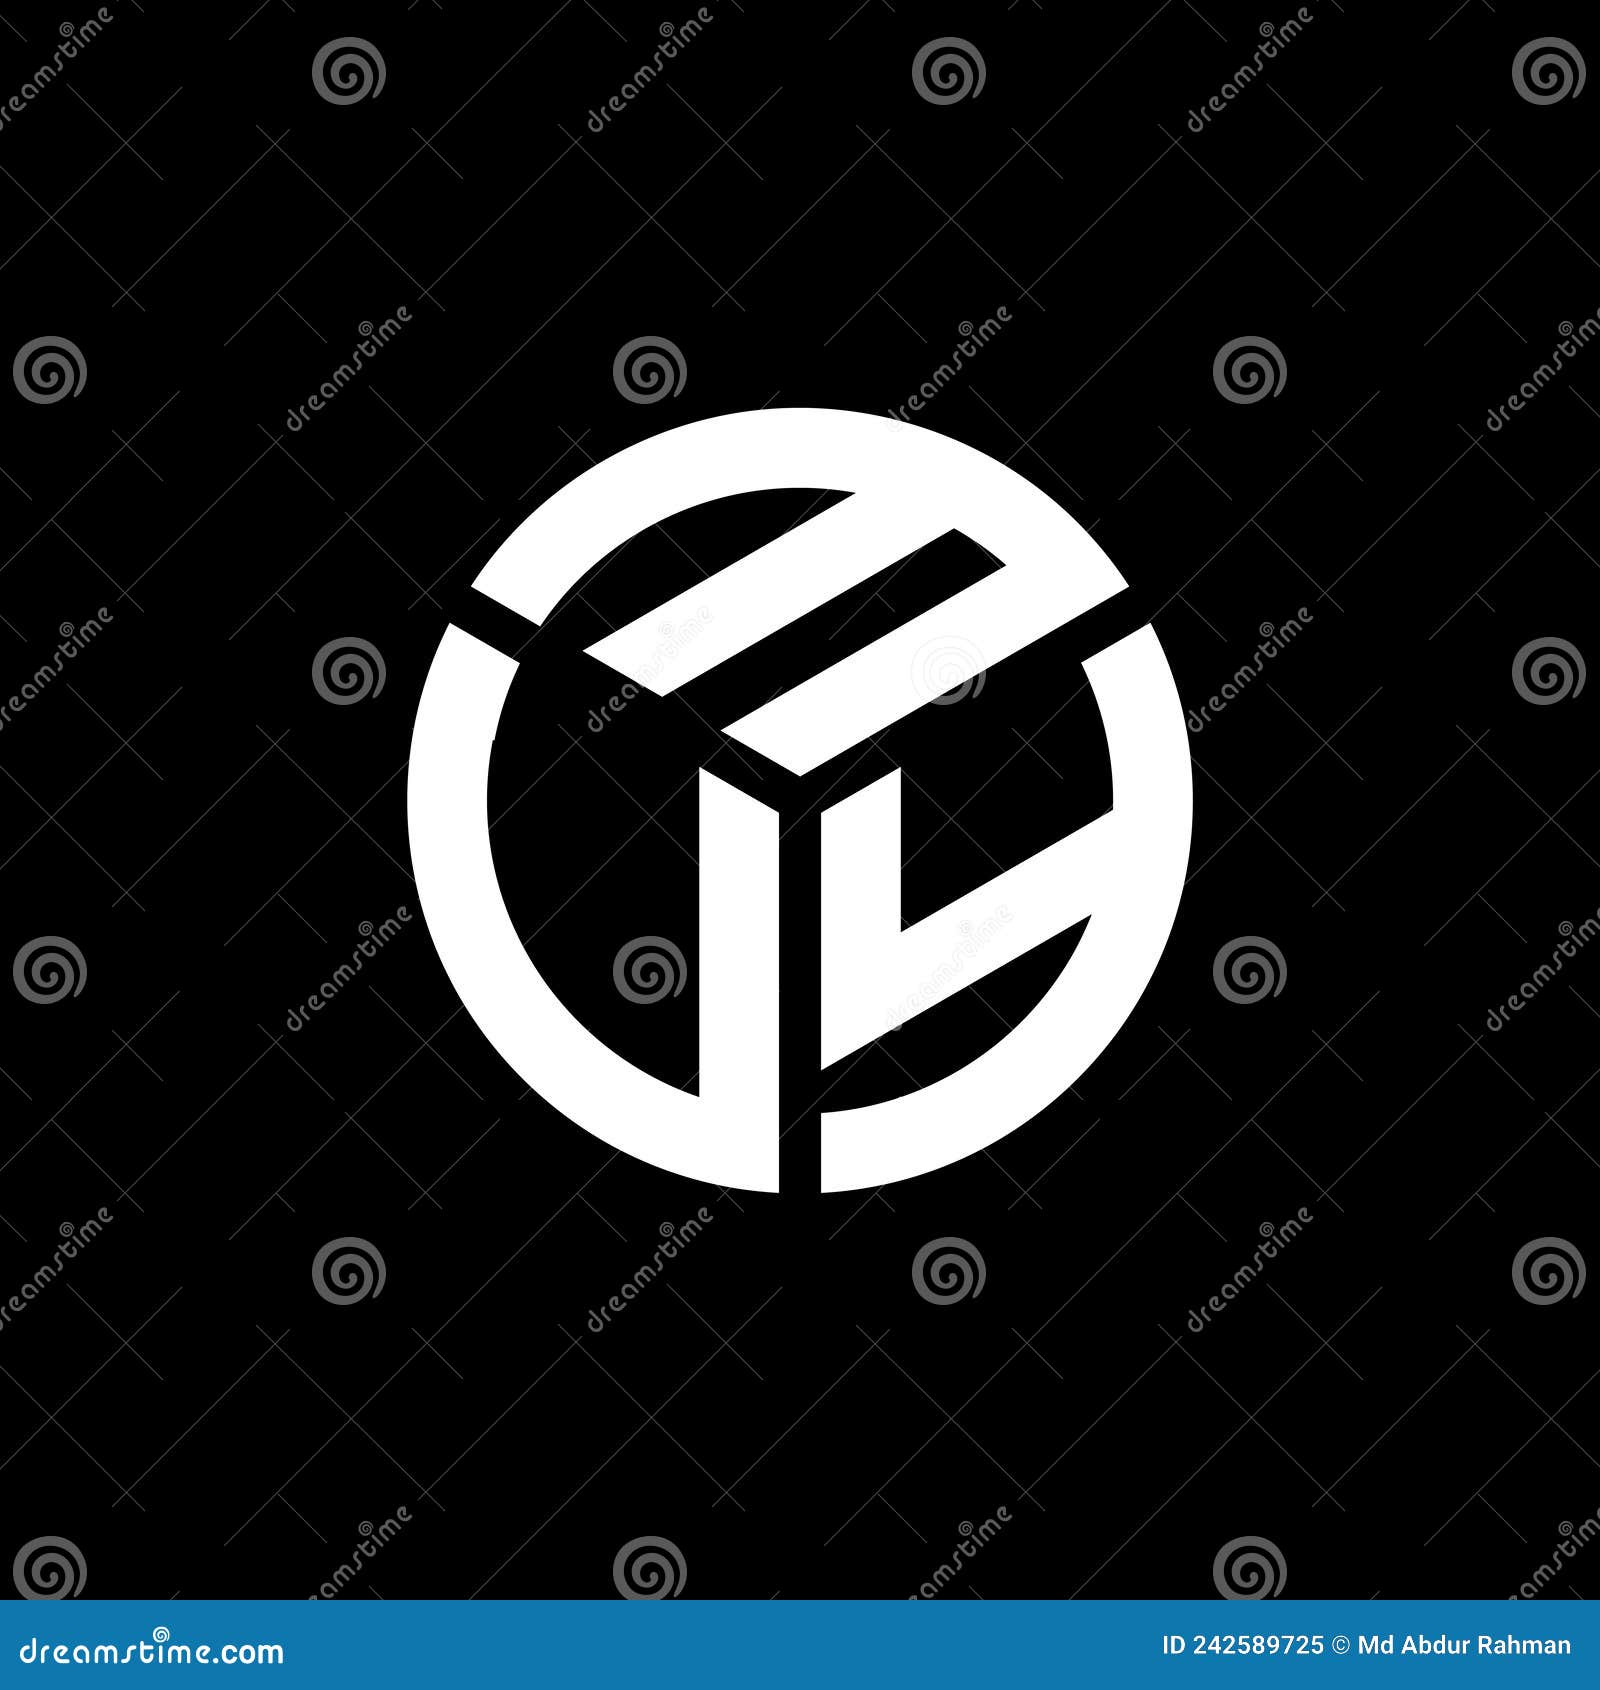 muy letter logo  on black background. muy creative initials letter logo concept. muy letter 